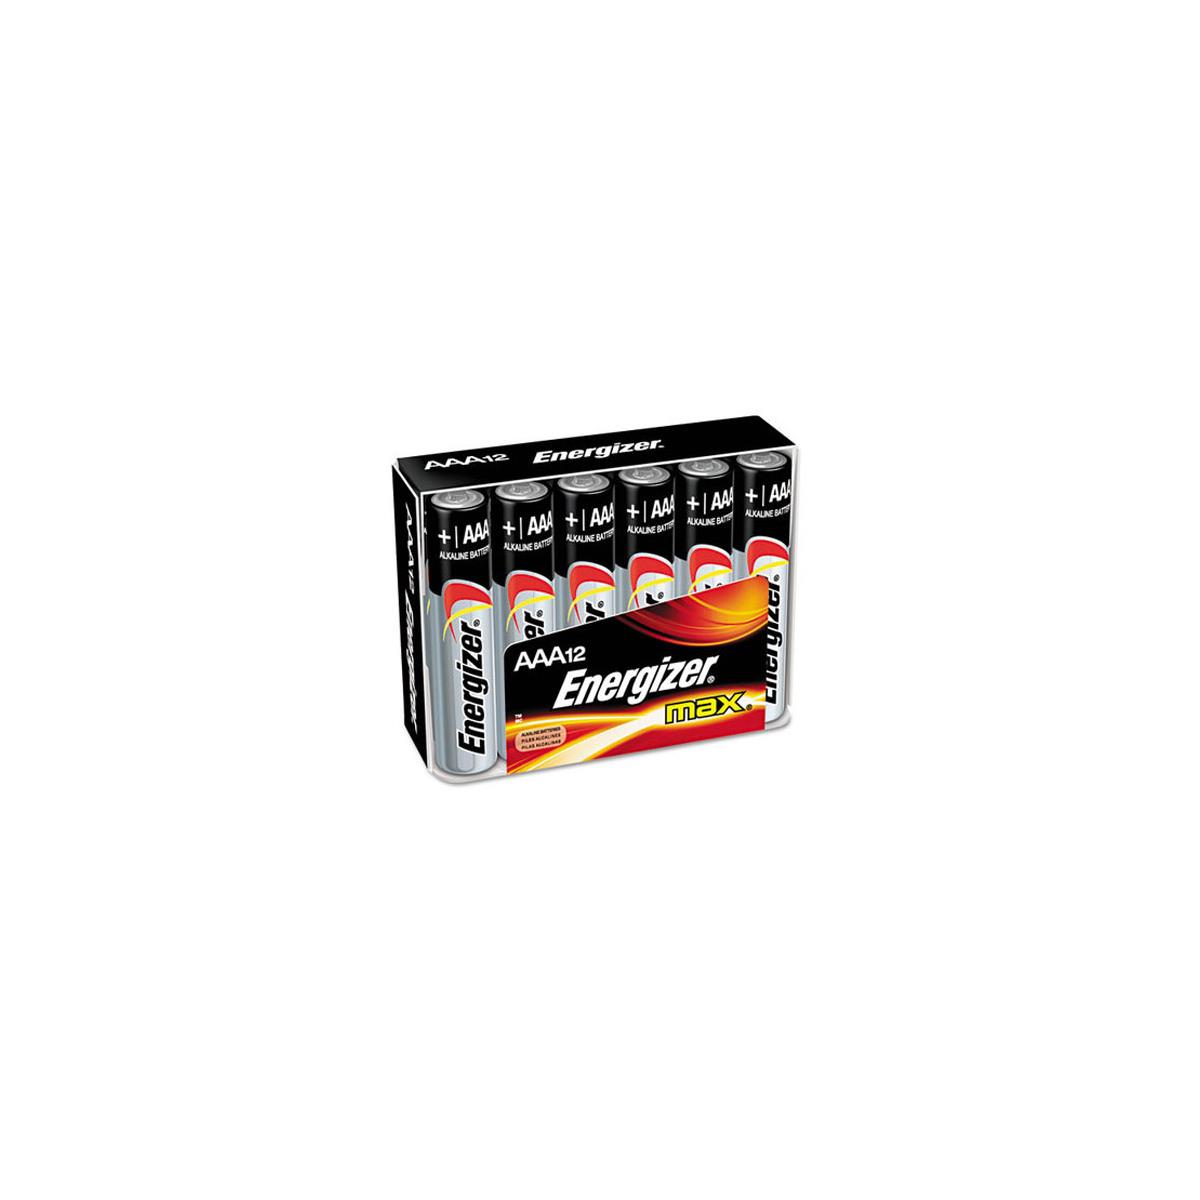 

Energizer Max AAA 1.5V Alkaline Battery, 12-Pack